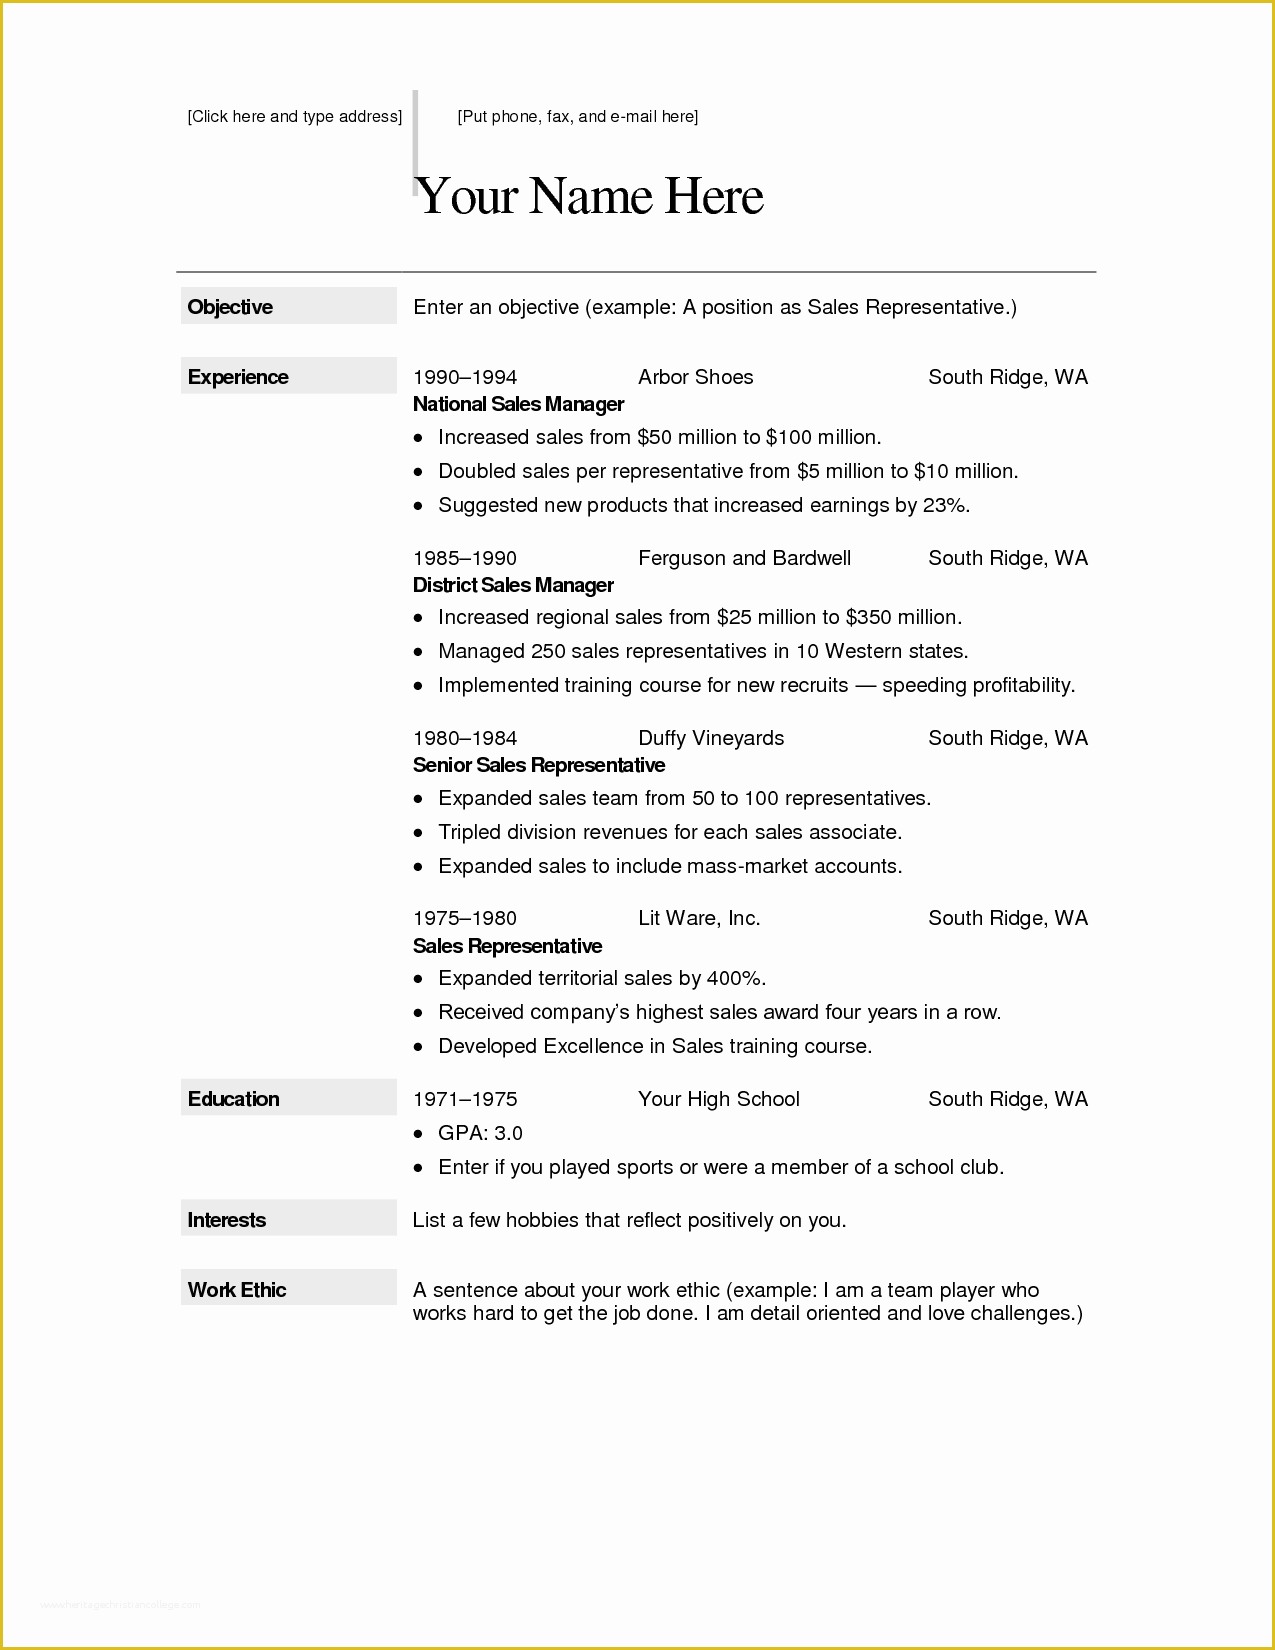 Free Creative Resume Templates for Mac Of Free Creative Resume Templates for Macfree Creative Resume